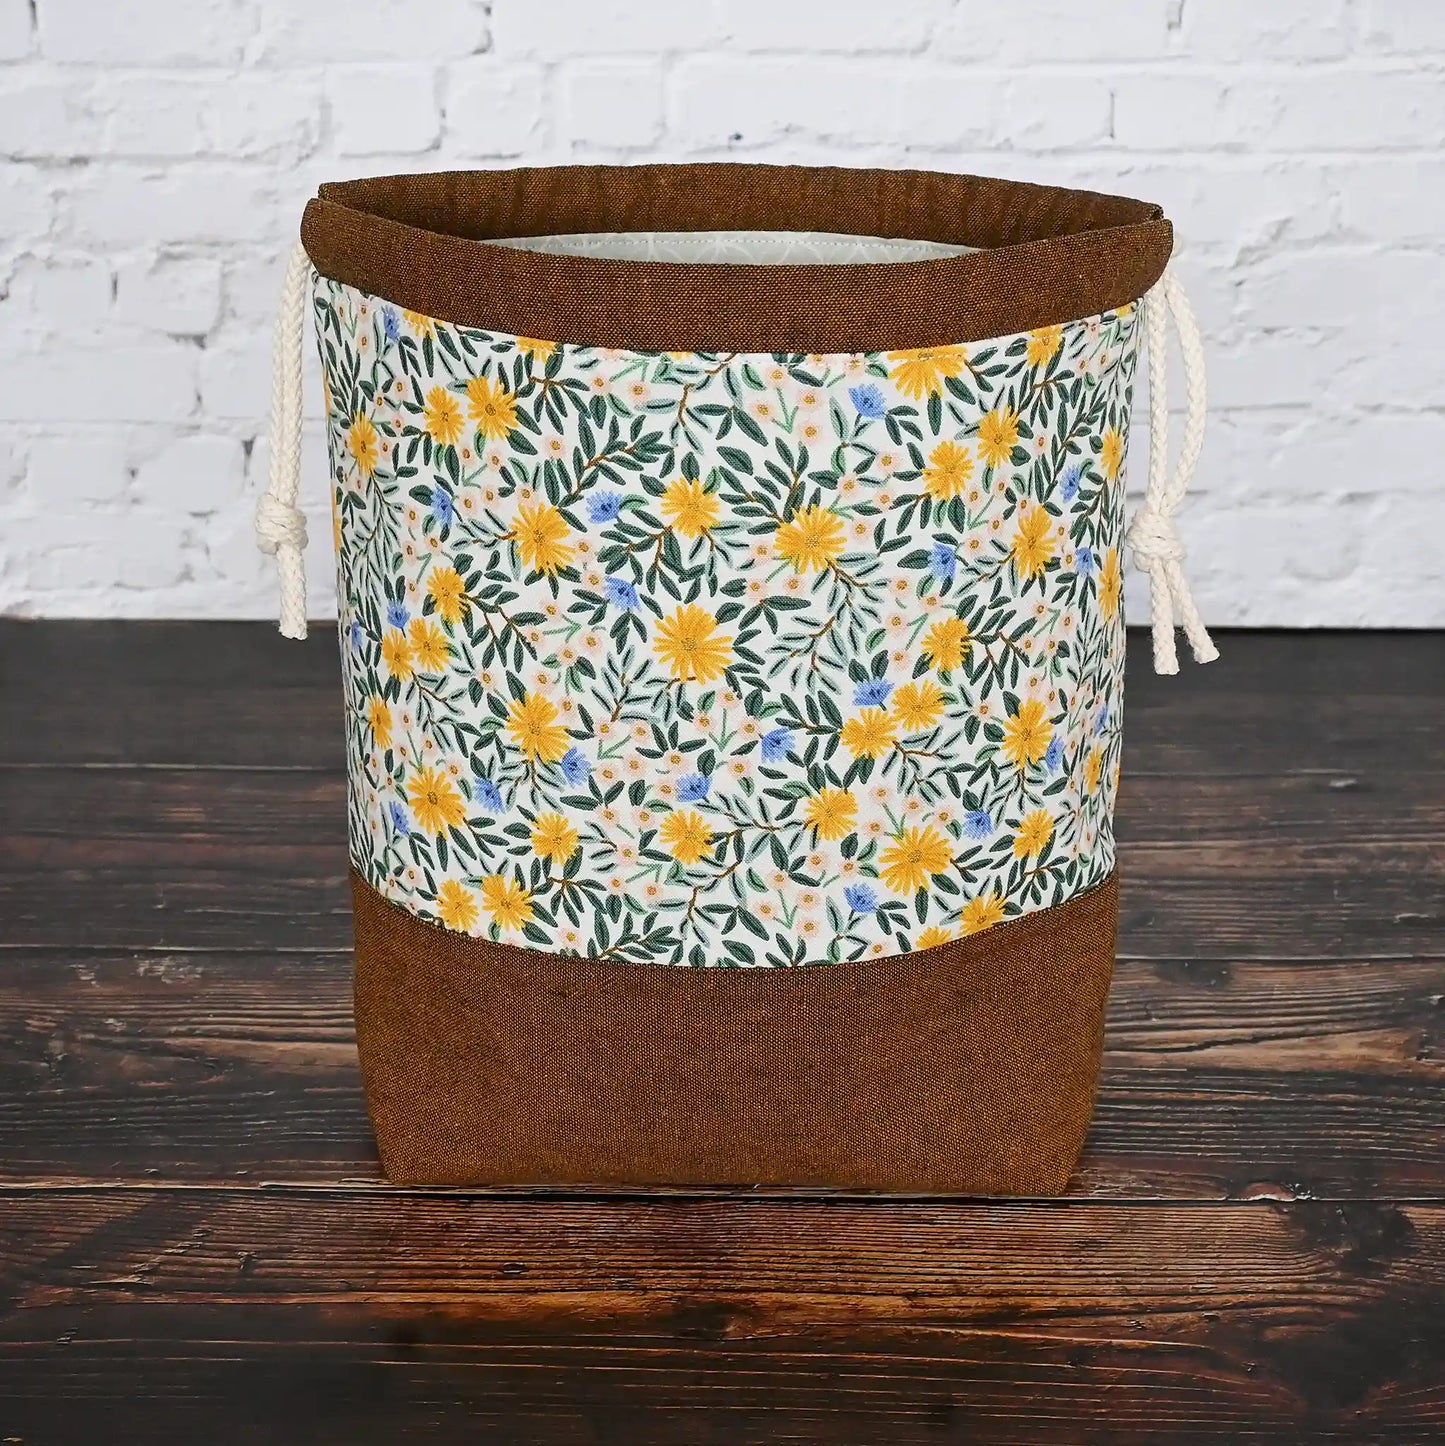 *Restocked!* Pretty Floral Print Project Bag with Pockets